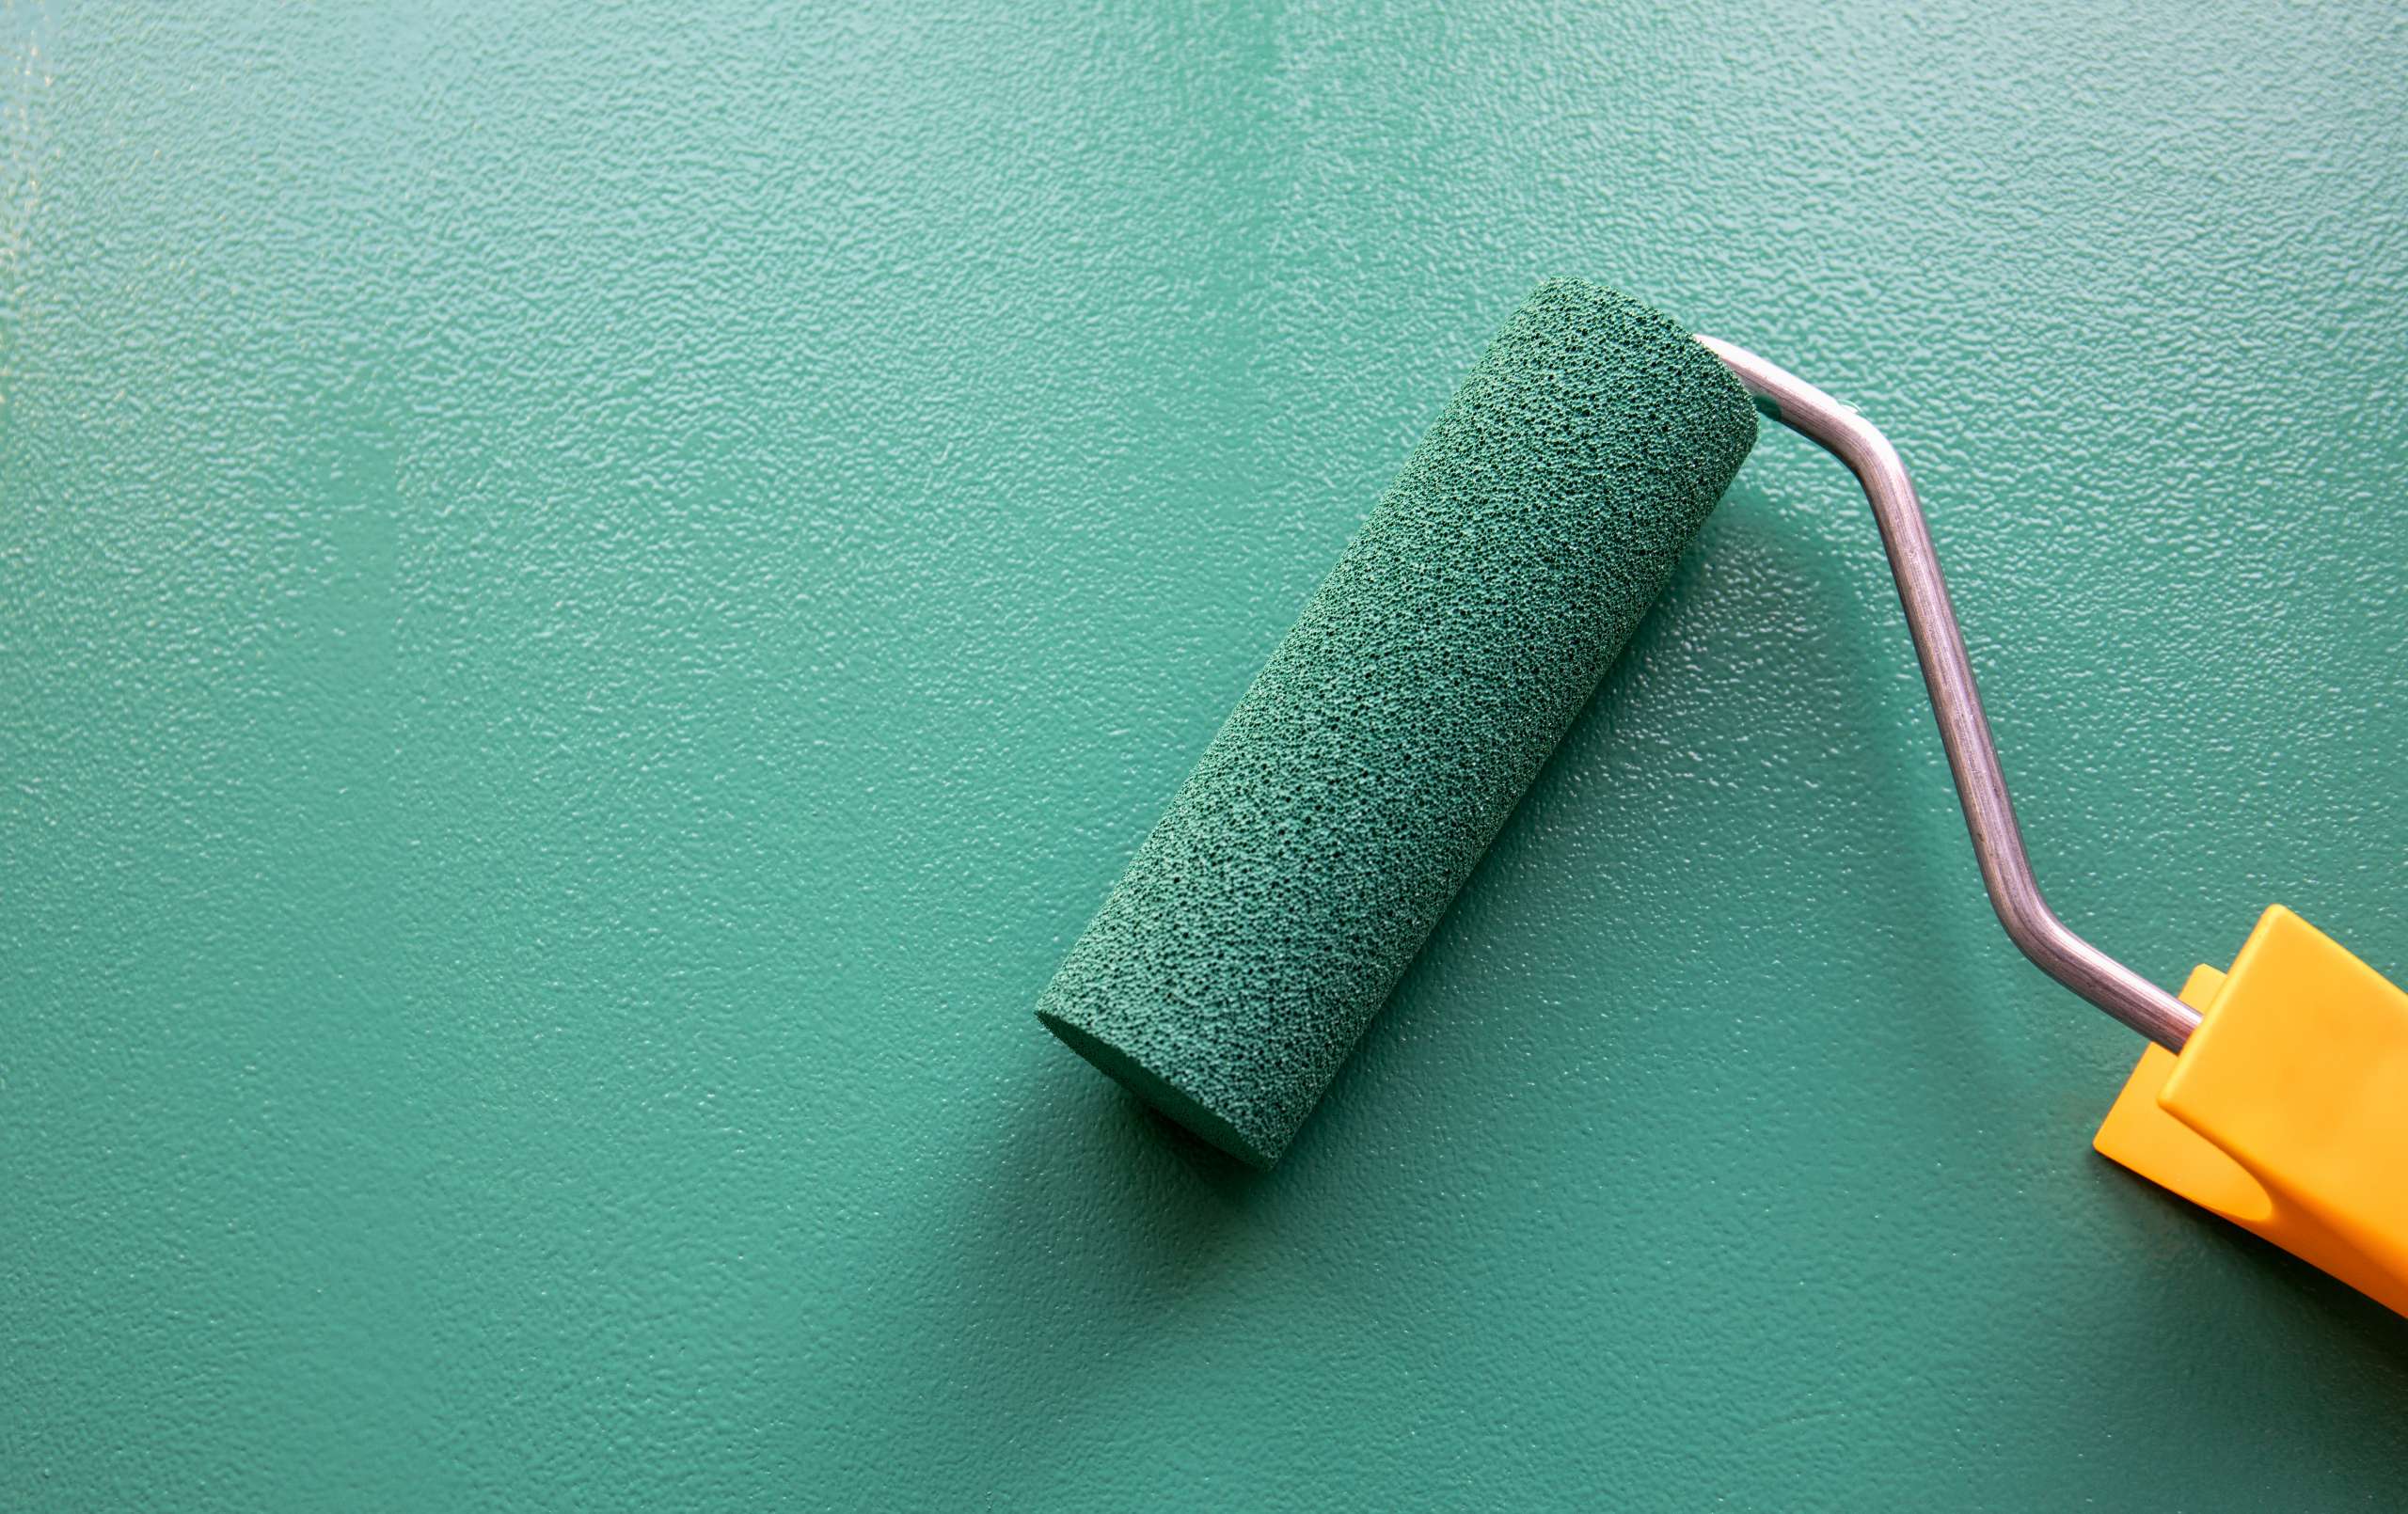 Paint roller with green colour on painted wooden surface.